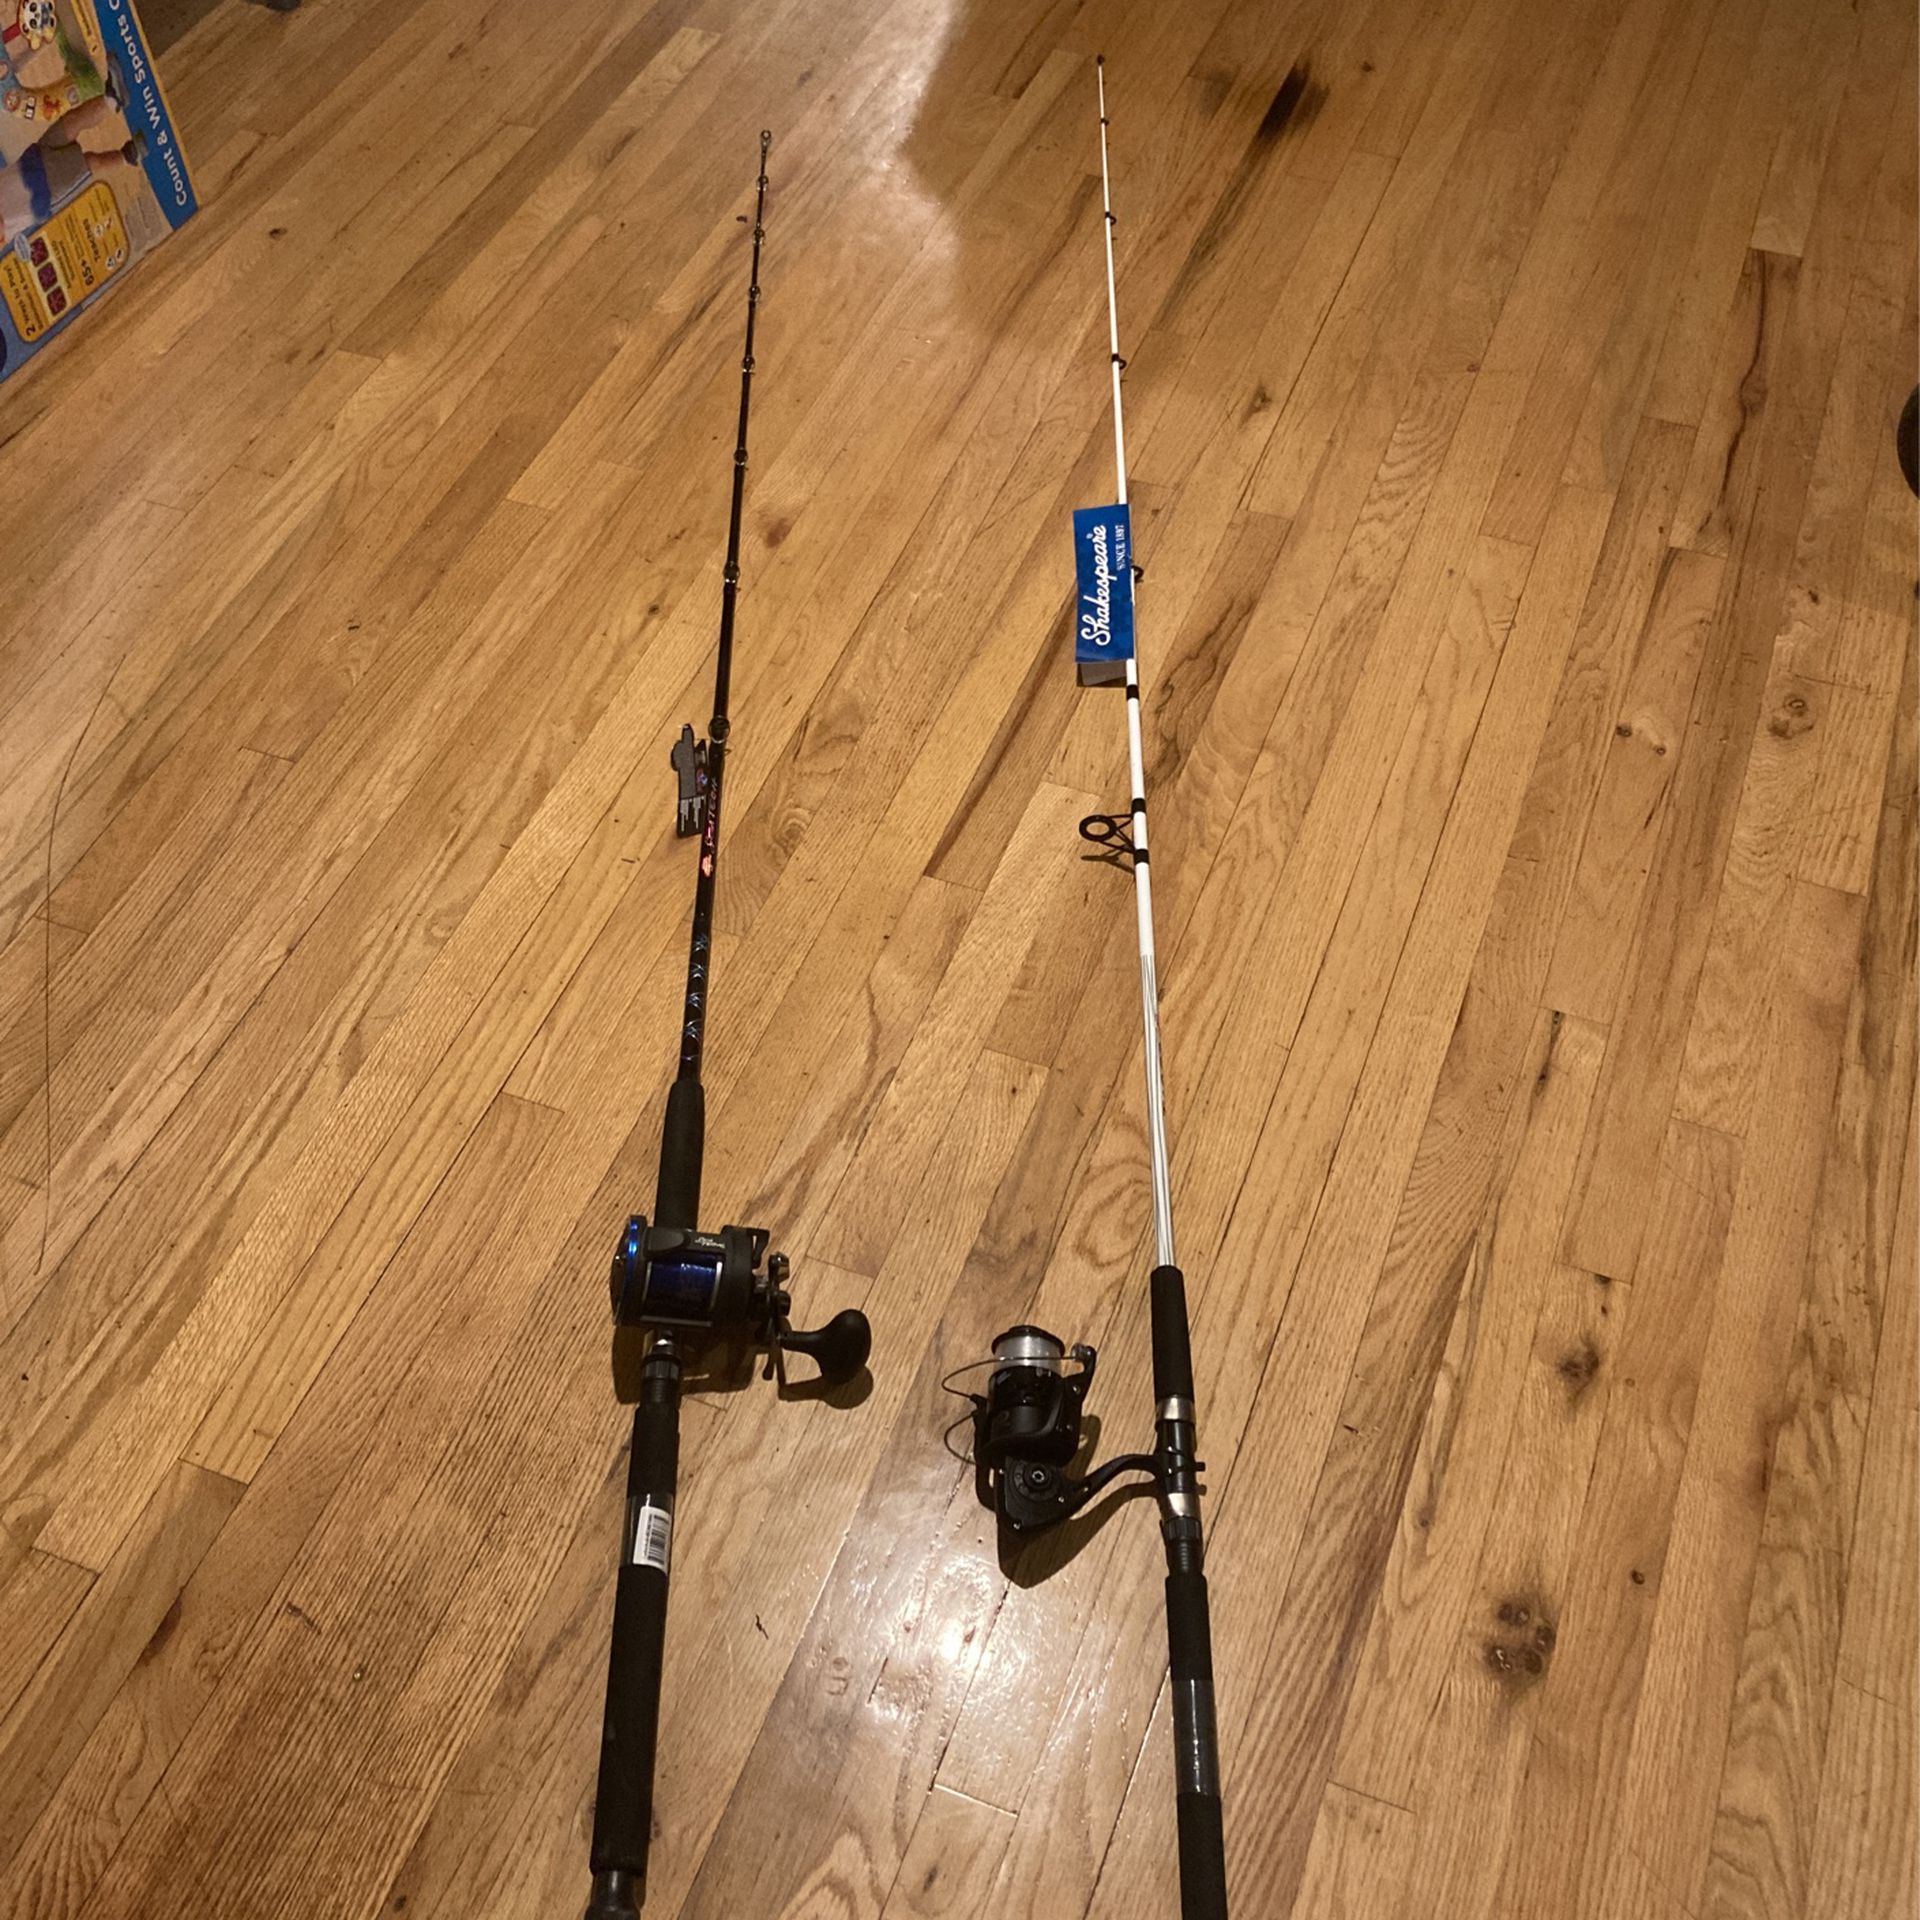 Brand New Fishing Poles for Sale in Shirley, NY - OfferUp